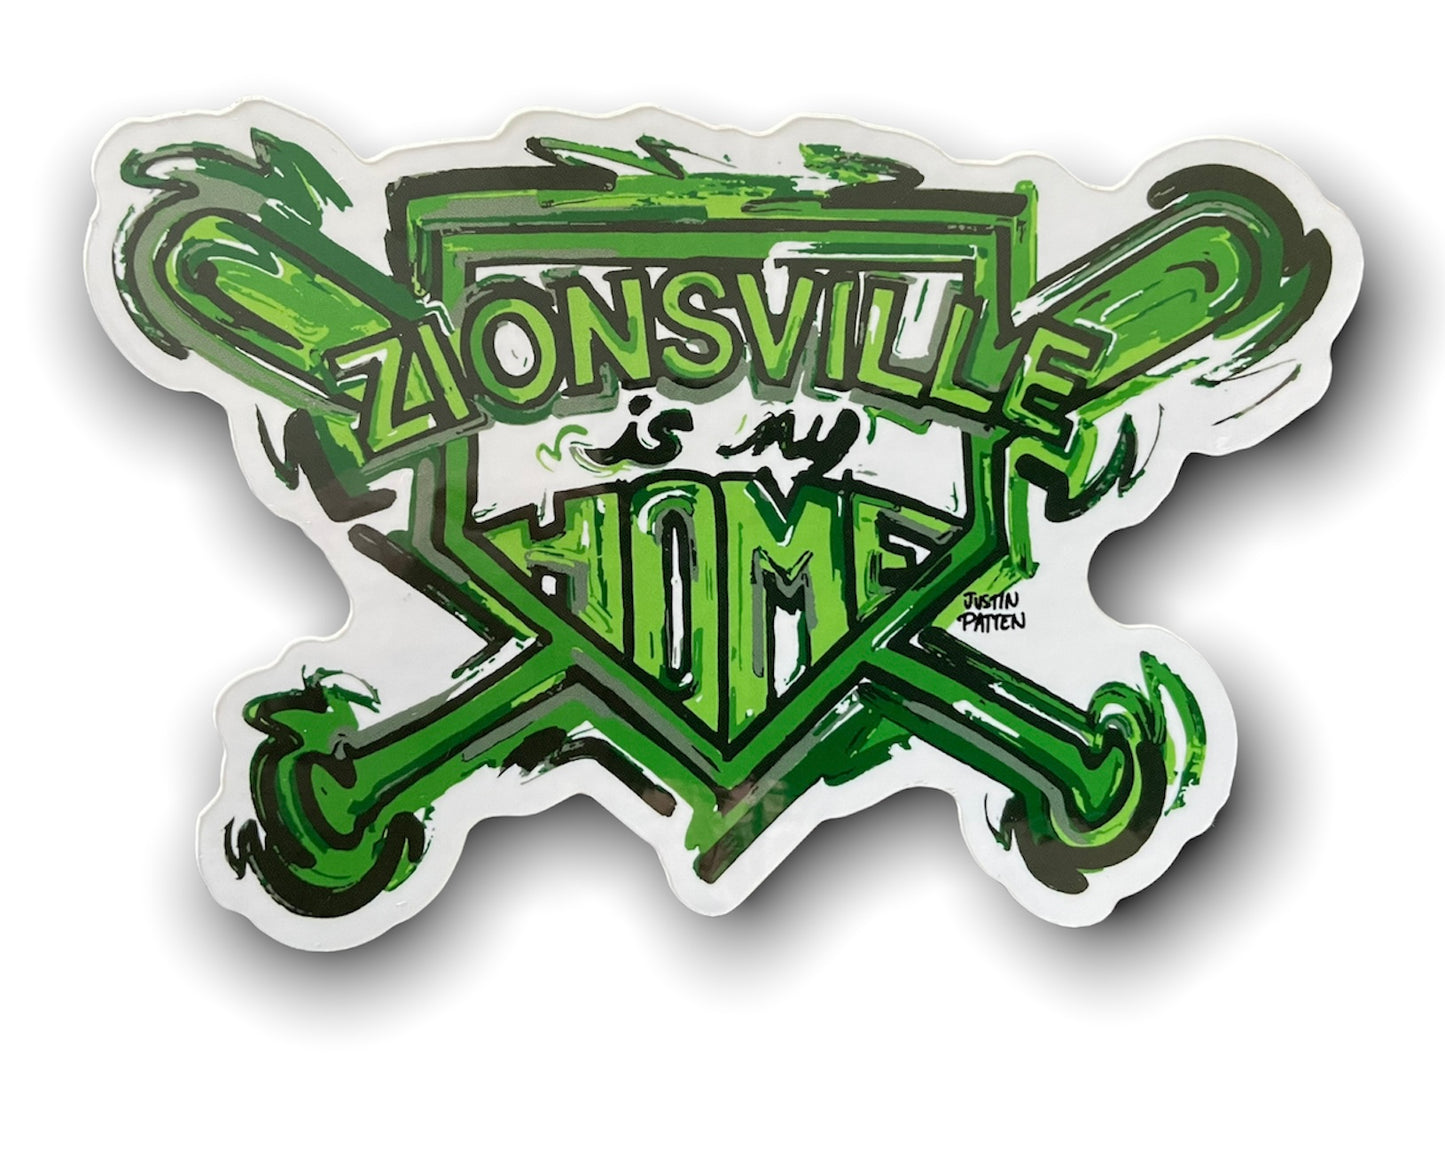 Zionsville Indiana Is My Home Sticker by Justin Patten